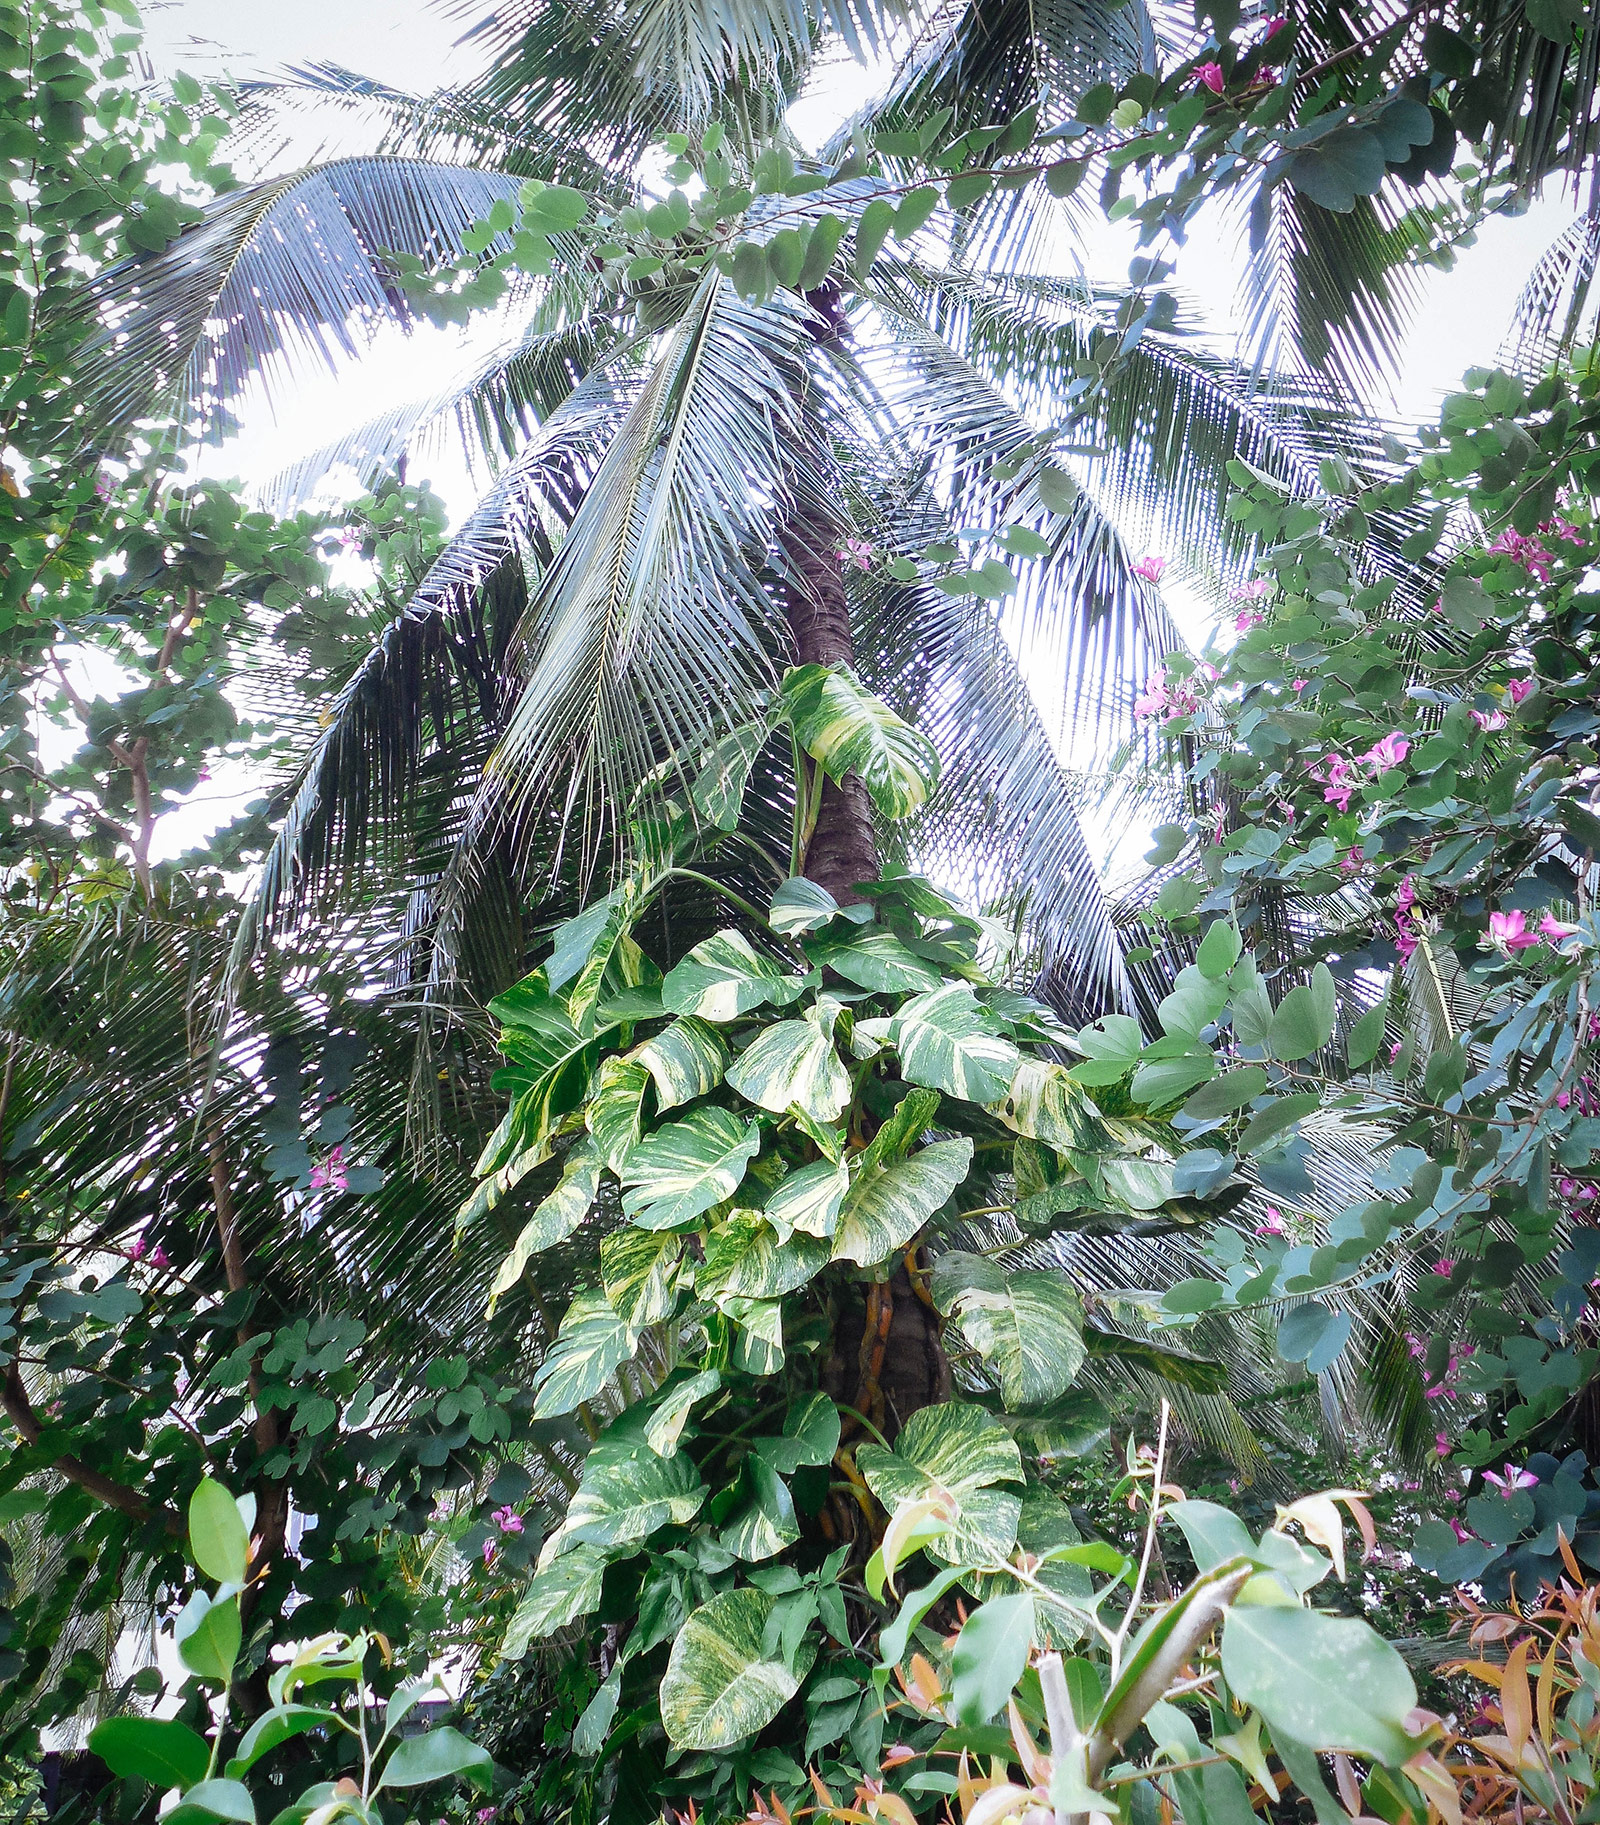 Jungle scene filled with tropical plants, including a variegated Monstera vine climbing up a palm tree